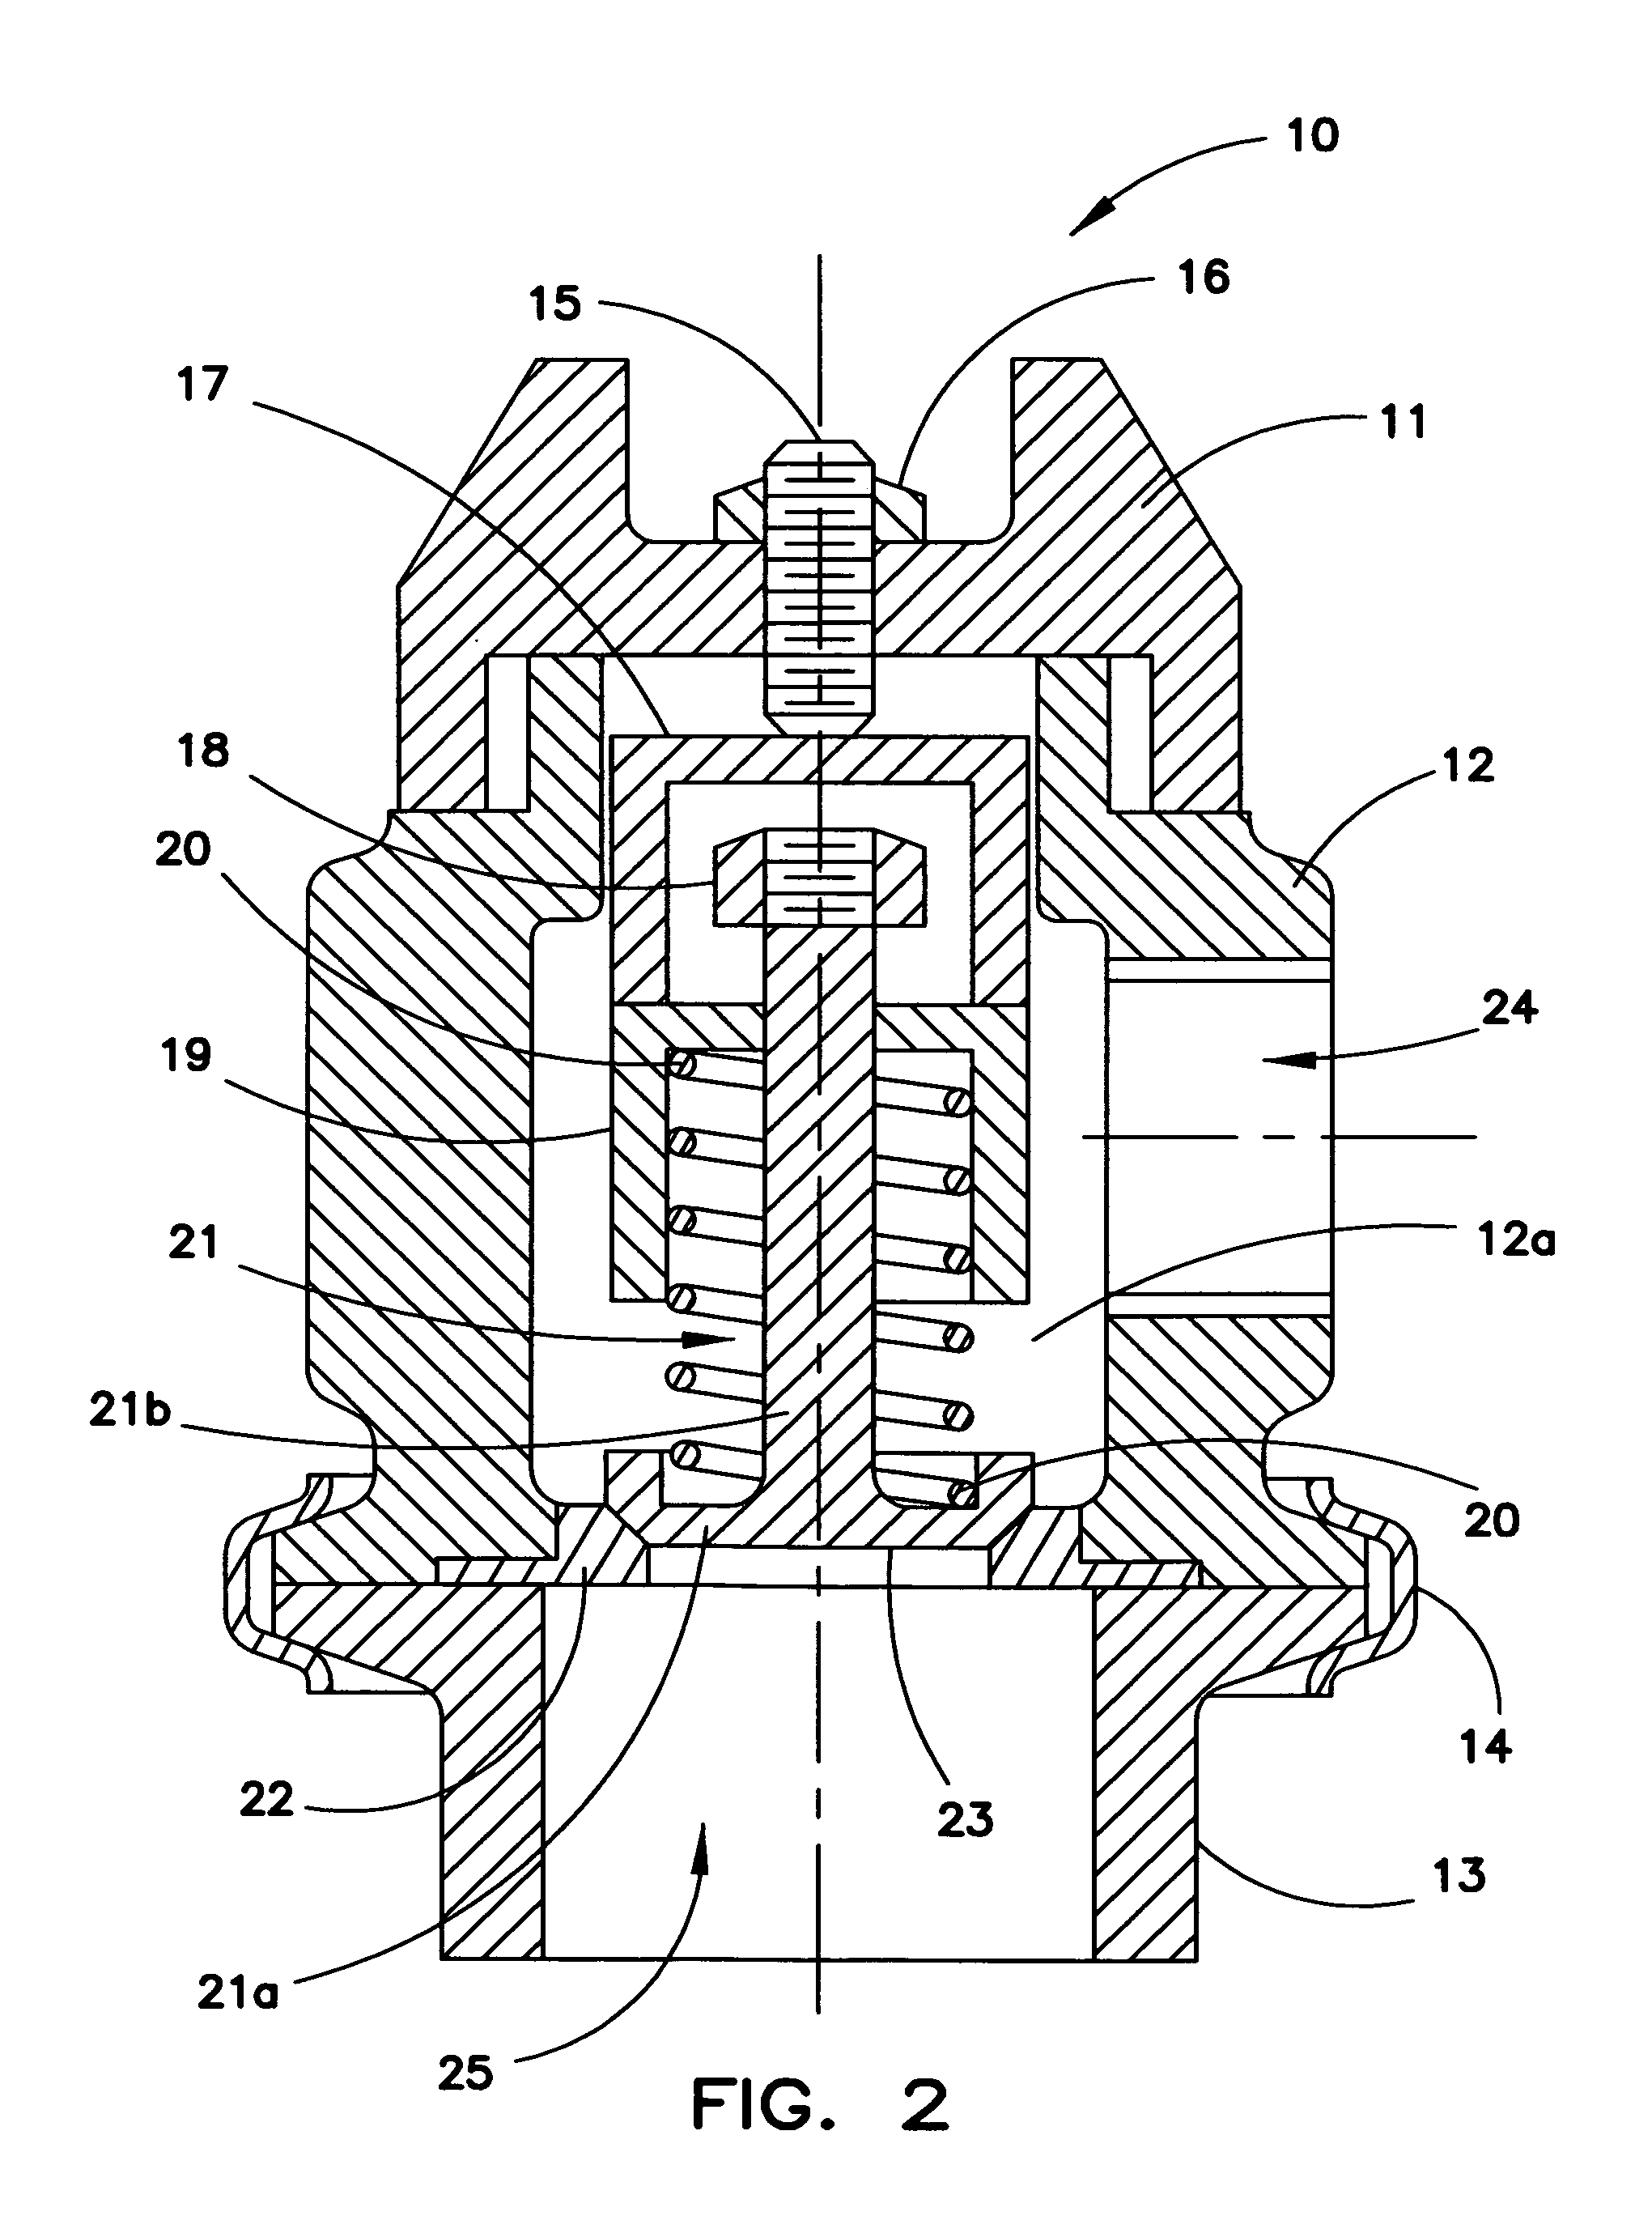 Boost pressure control system for turbocharged internal combustion engines